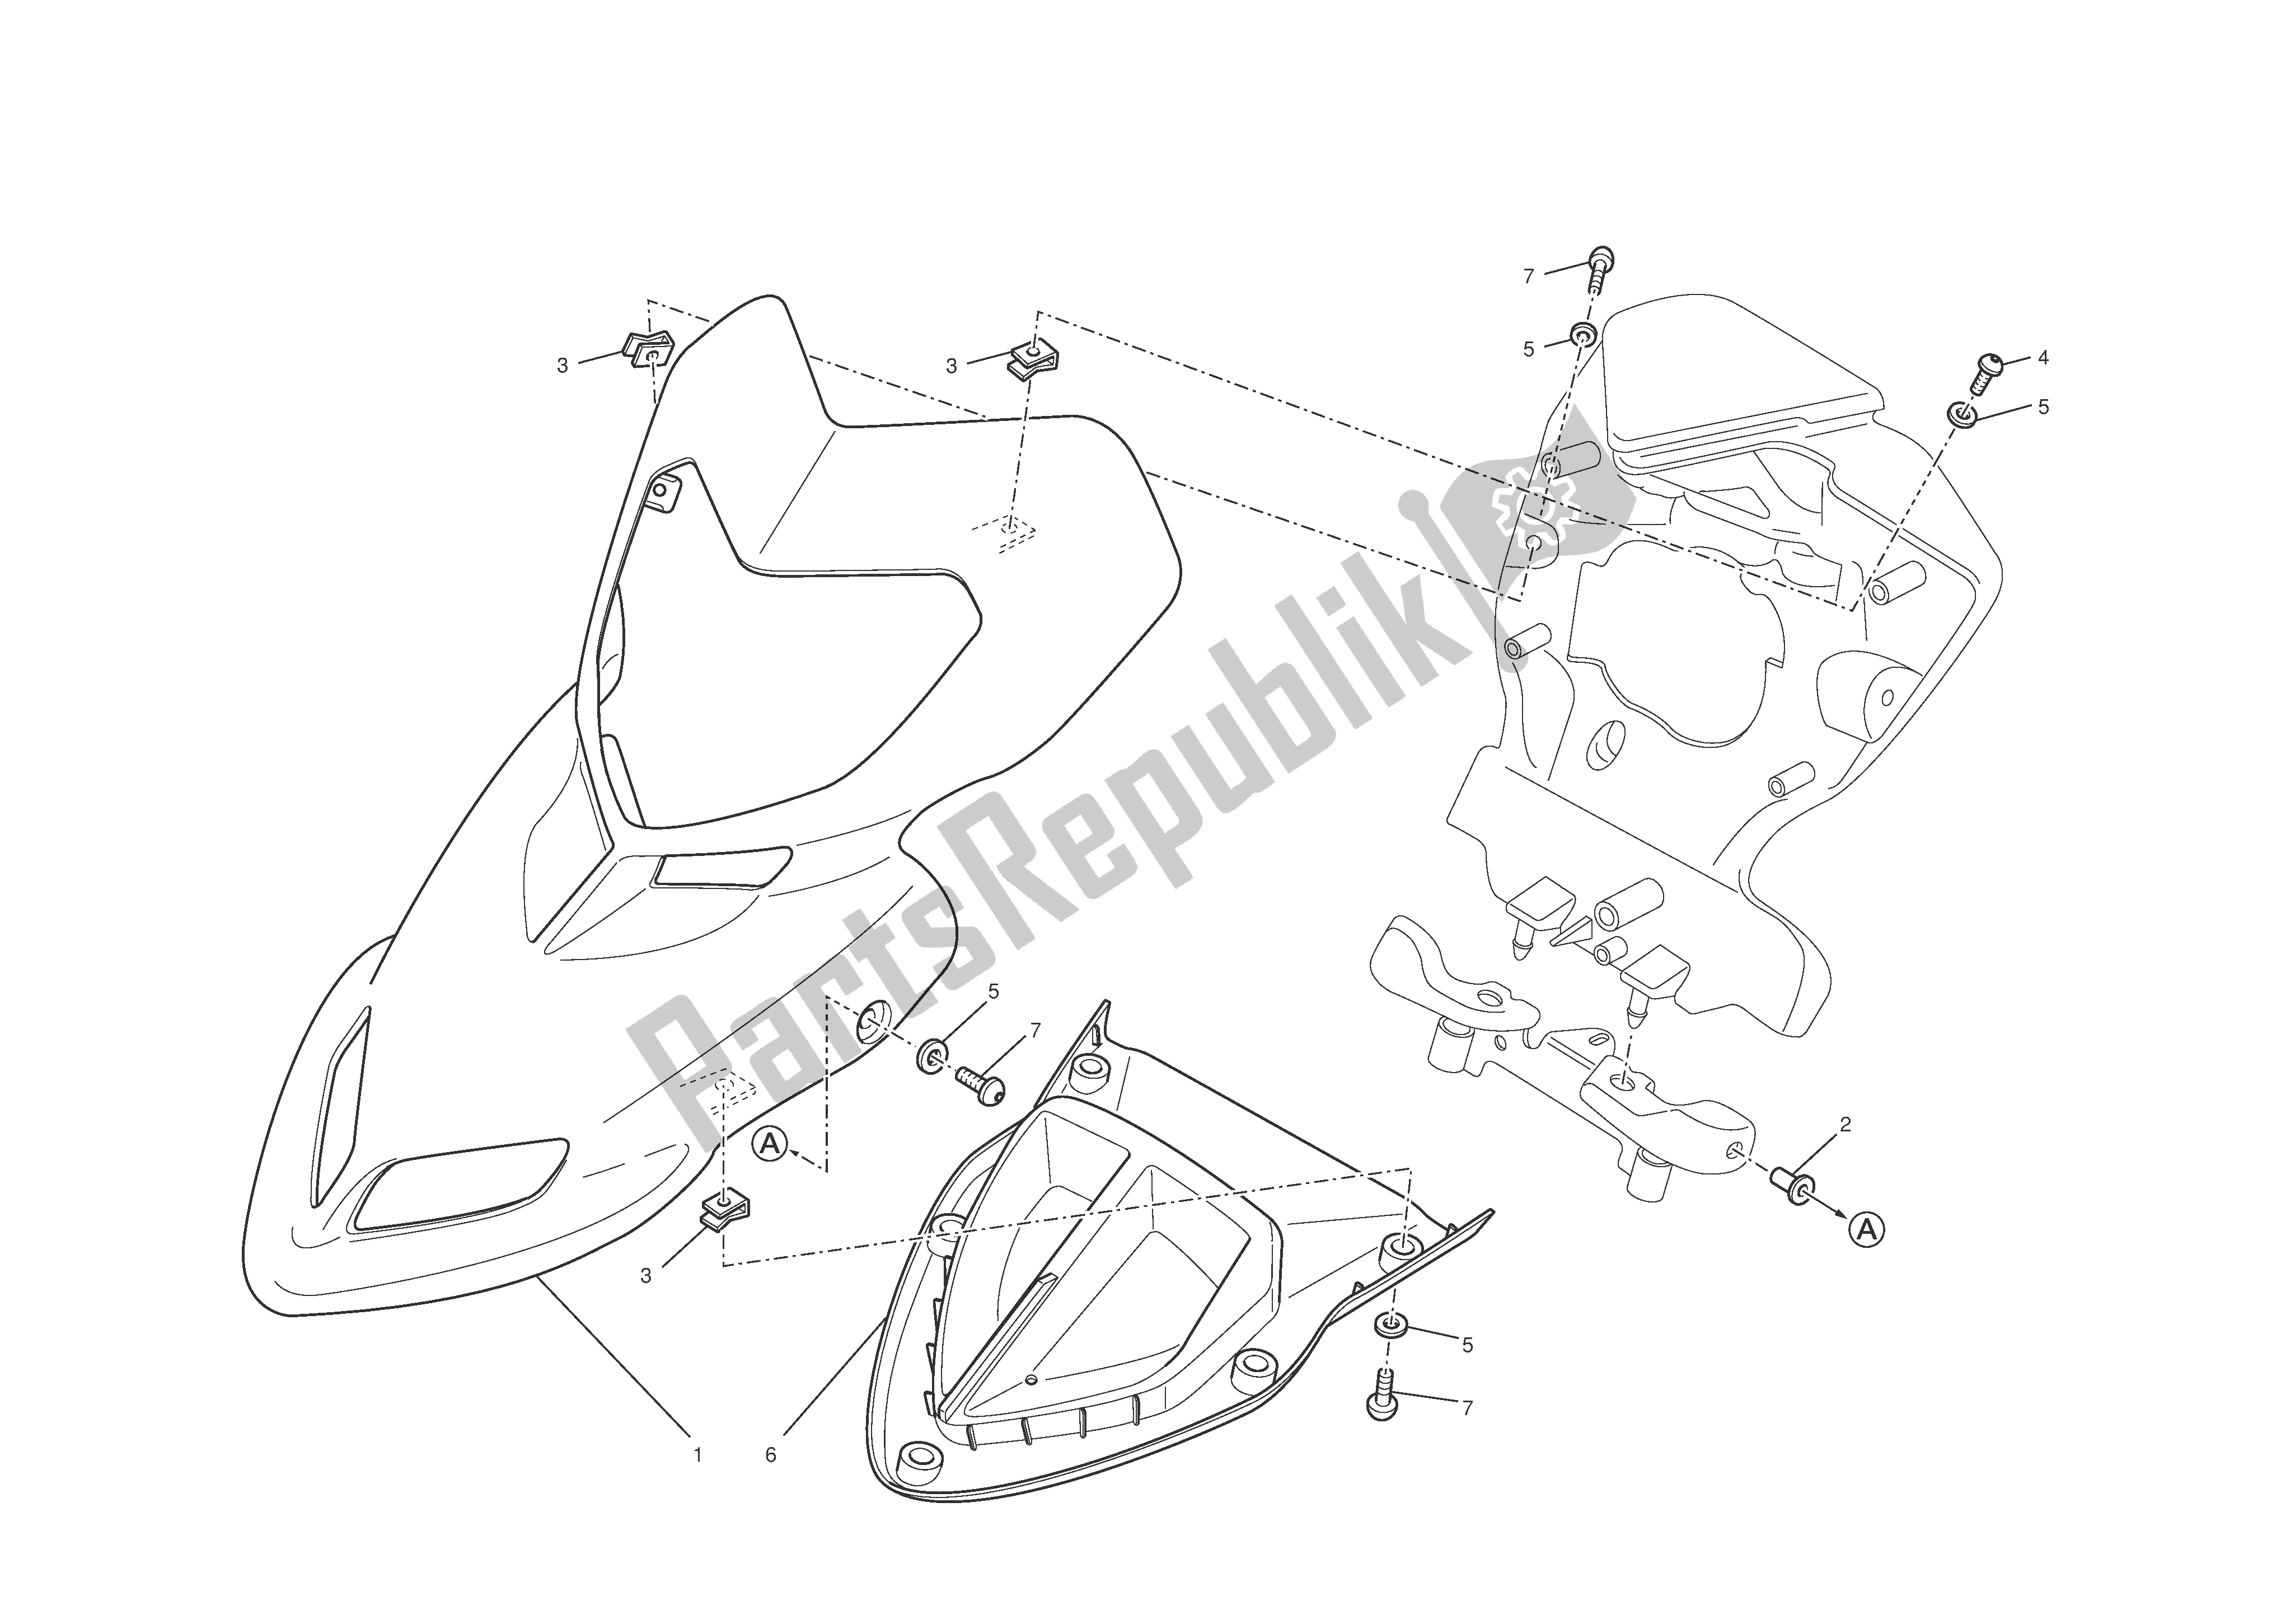 All parts for the Headlight Fairing of the Ducati Hypermotard 796 2011